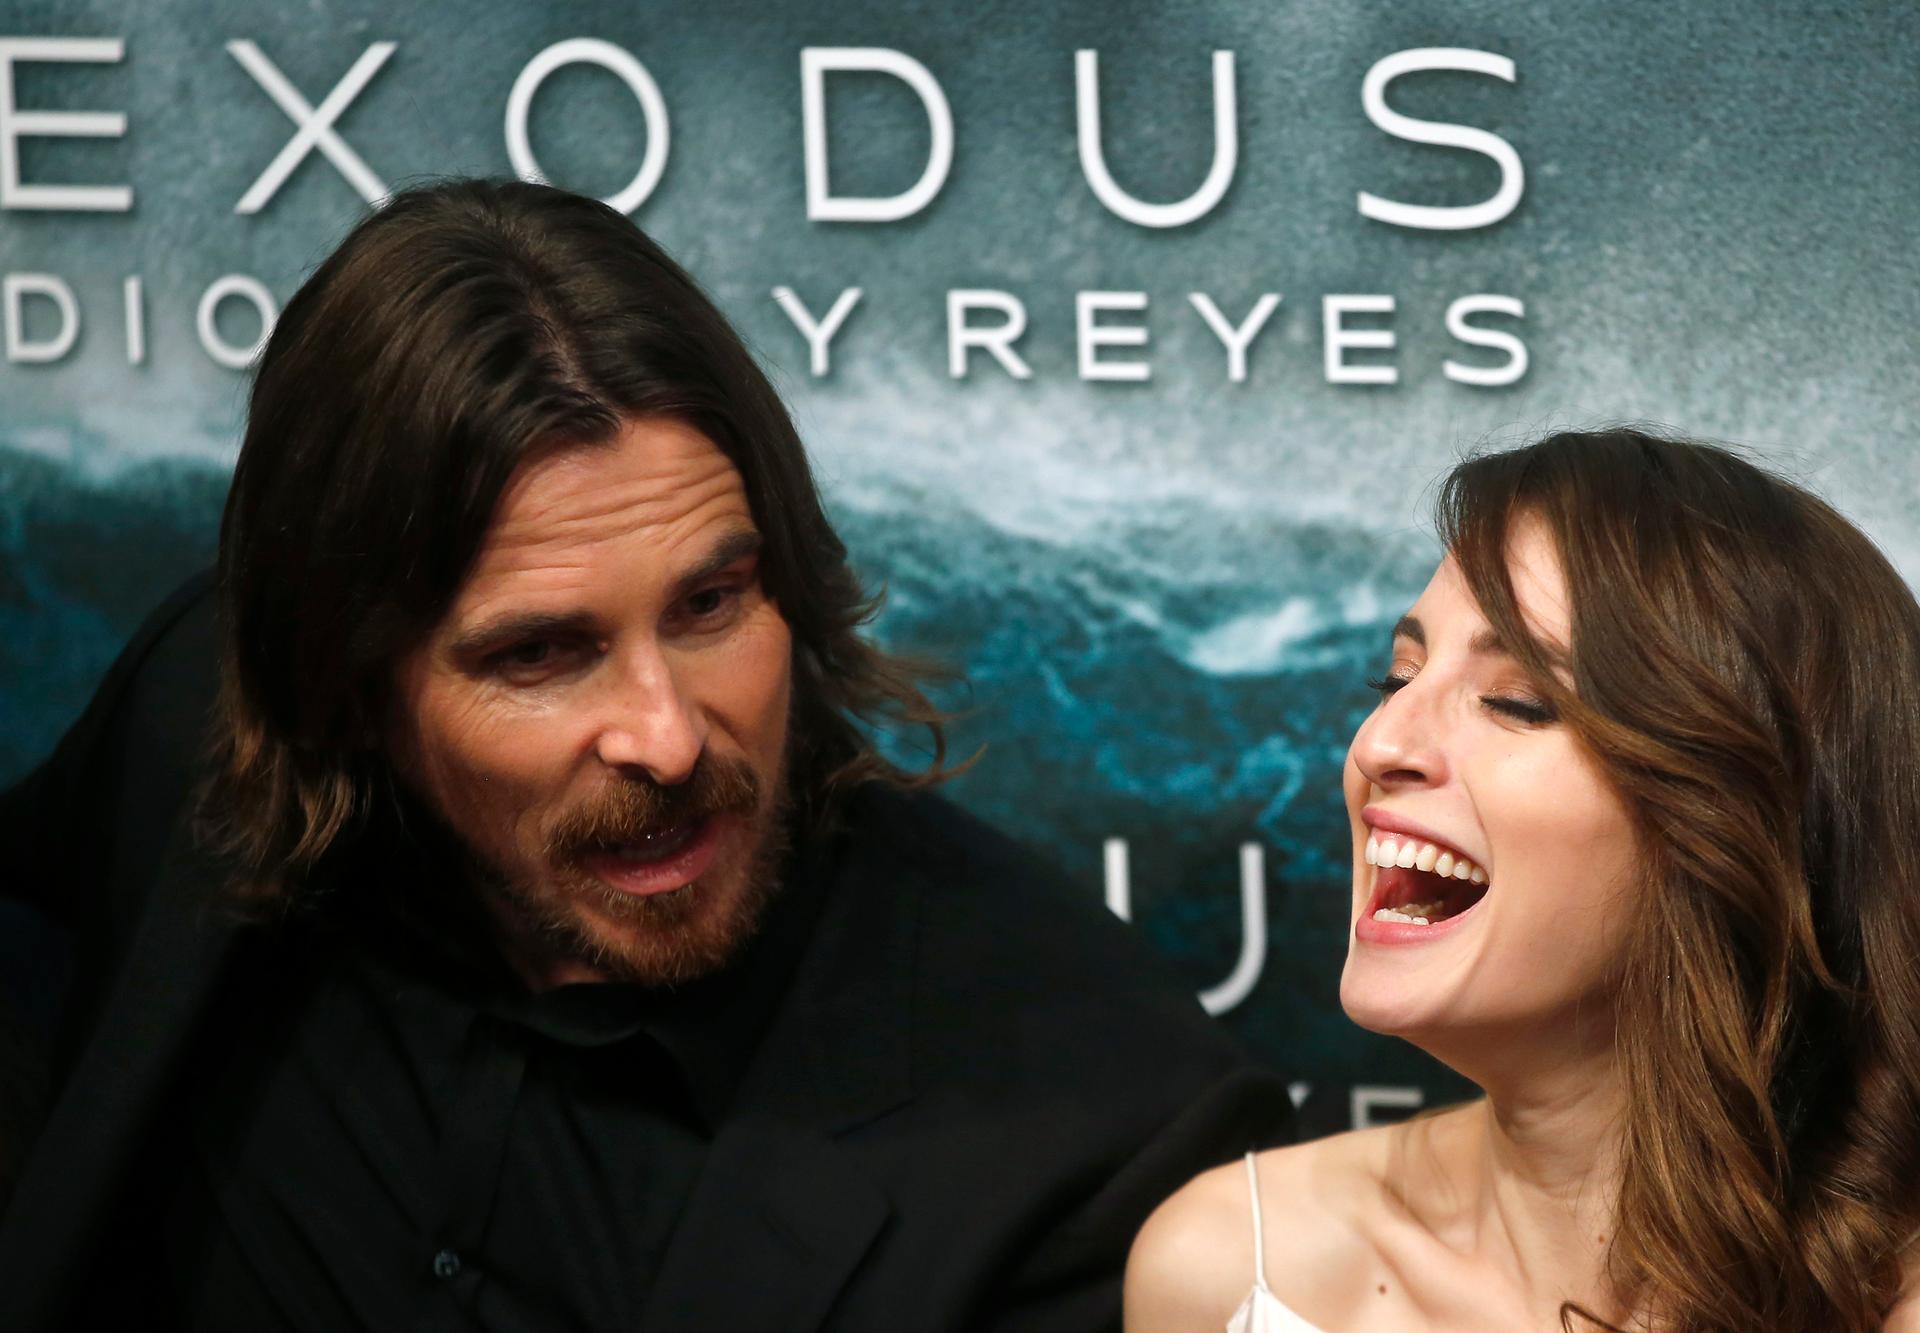 Cast members Christian Bale and Maria Valverde pose for photographs as they arrive for the film world premiere of "Exodus: Gods and Kings" in Madrid, Spain.